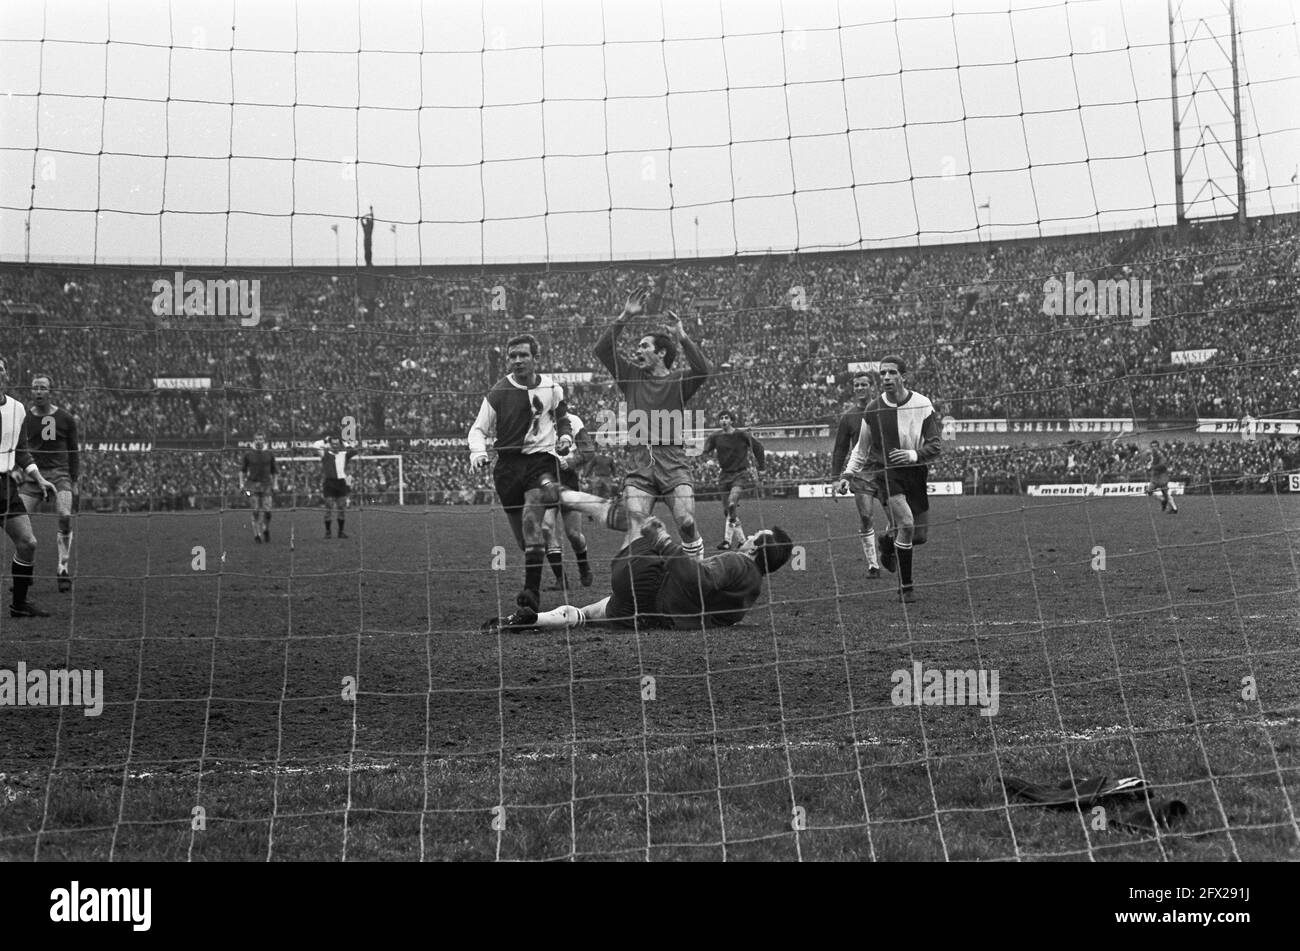 Ajax v Feyenoord 1-0. Suurendonk scored (cheering) on ground Eday P. G., March 10, 1968, sports, soccer, The Netherlands, 20th century press agency photo, news to remember, documentary, historic photography 1945-1990, visual stories, human history of the Twentieth Century, capturing moments in time Stock Photo